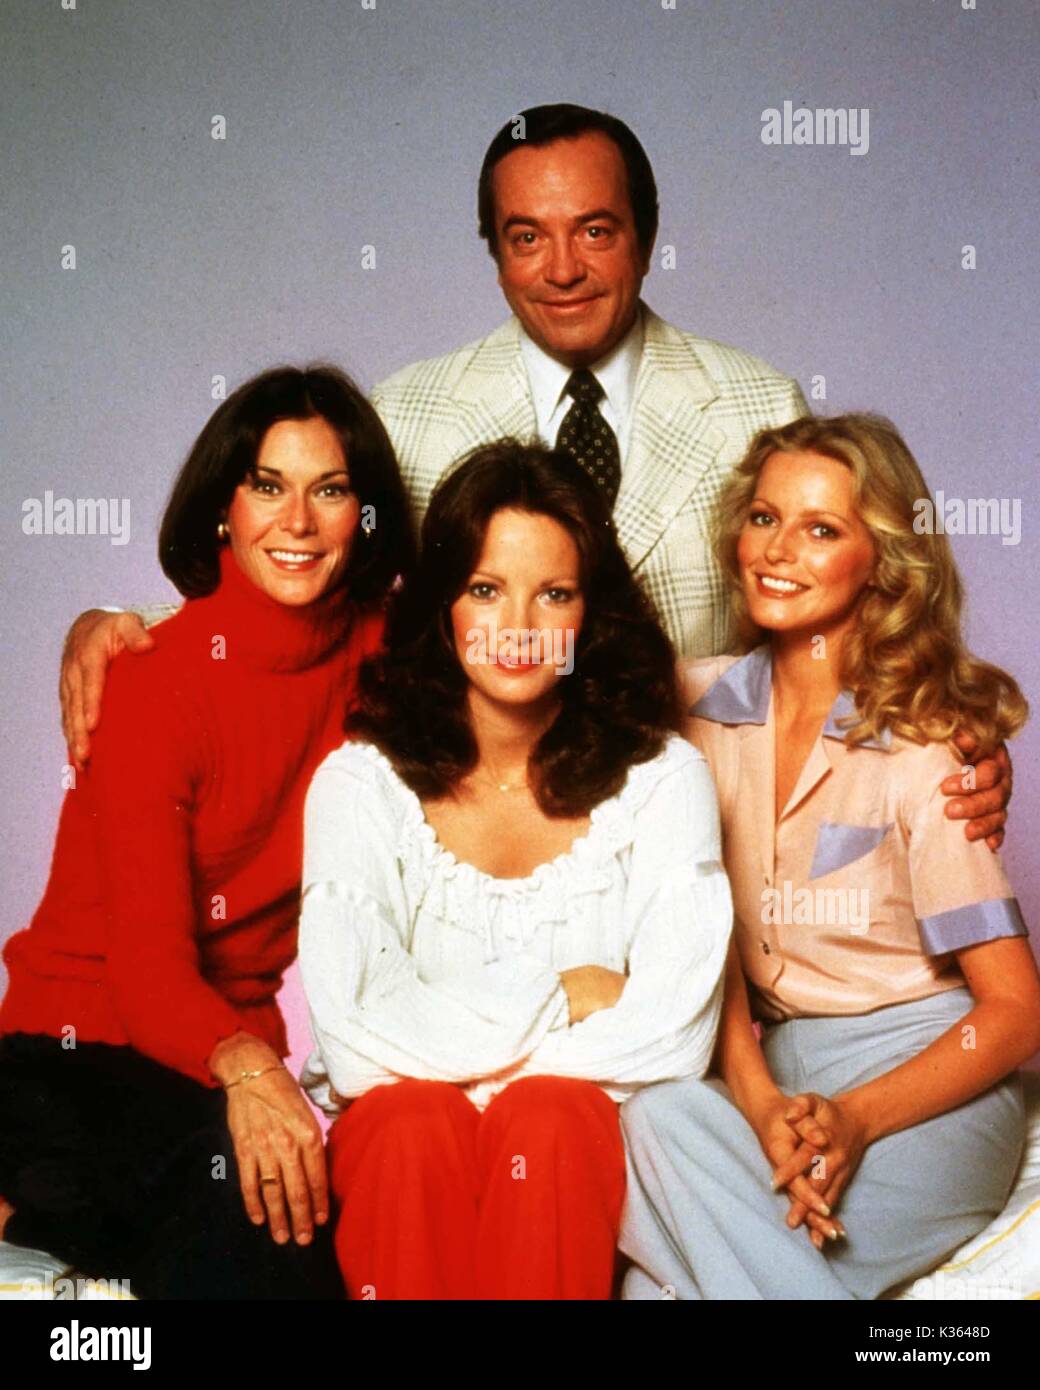 CHARLIE'S ANGELS [Série TV US 1976 - 1981] Kate Jackson, JACLYN SMITH, David BOYLE, CHERYL LADD CHARLIE'S ANGELS Banque D'Images